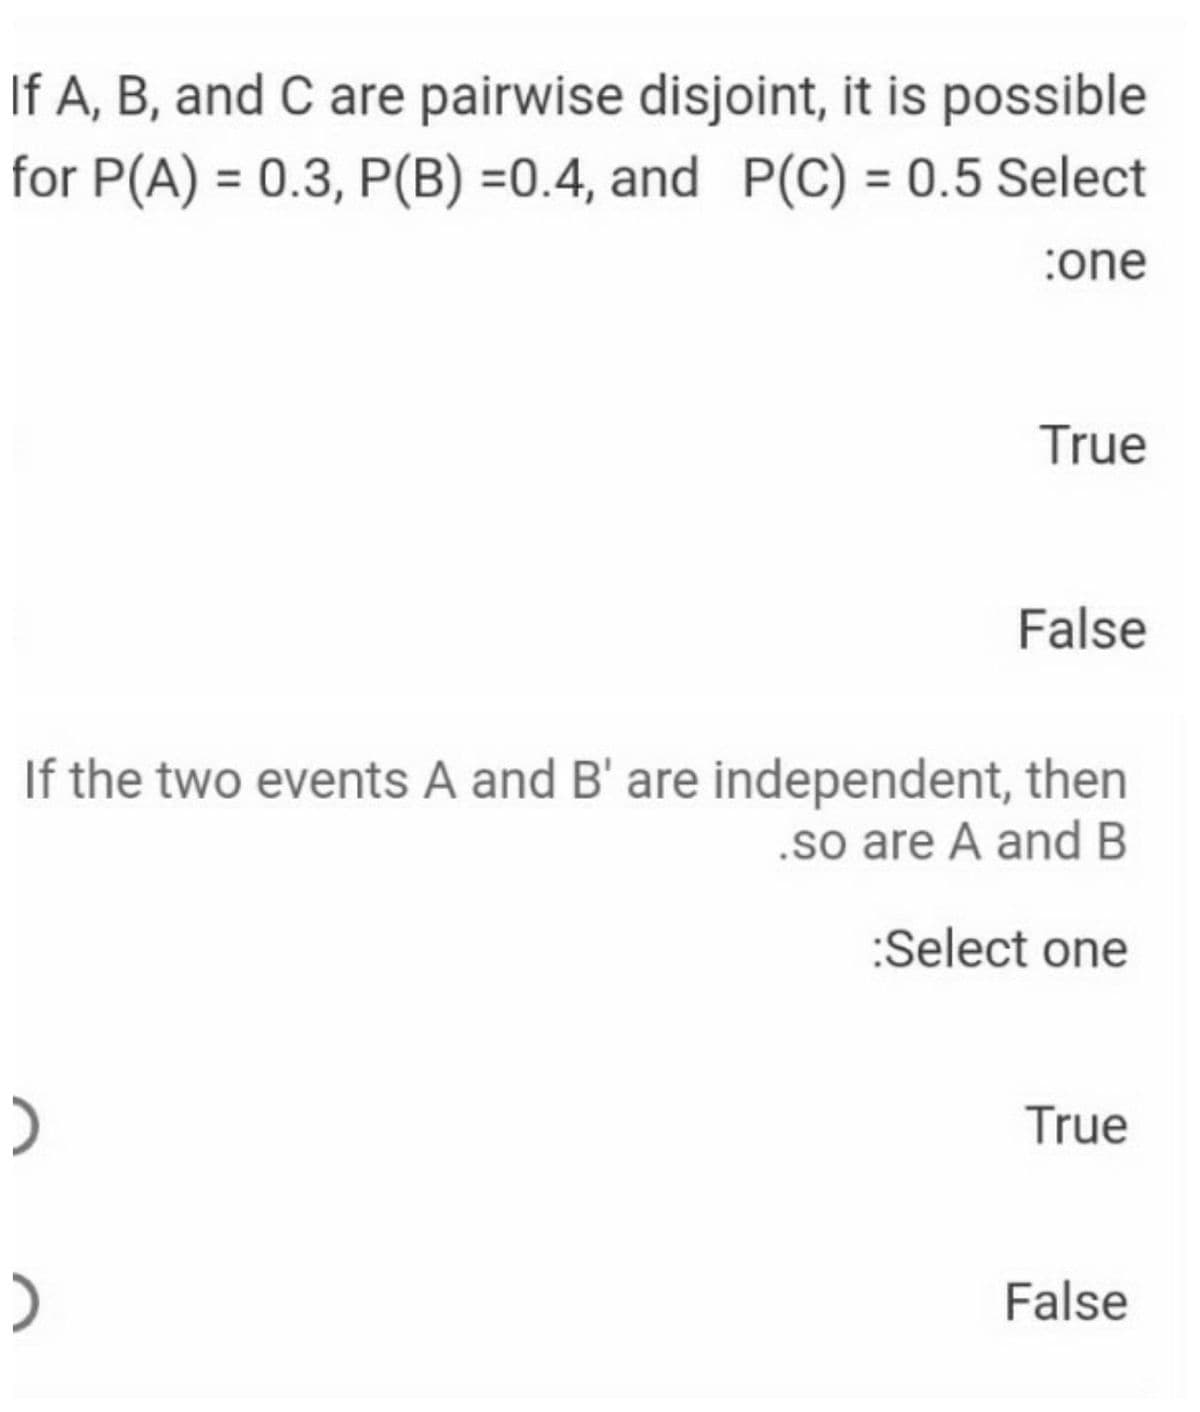 If A, B, and C are pairwise disjoint, it is possible
for P(A) = 0.3, P(B) =0.4, and P(C) = 0.5 Select
%3D
:one
True
False
If the two events A and B' are independent, then
.so are A and B
:Select one
True
)
False
